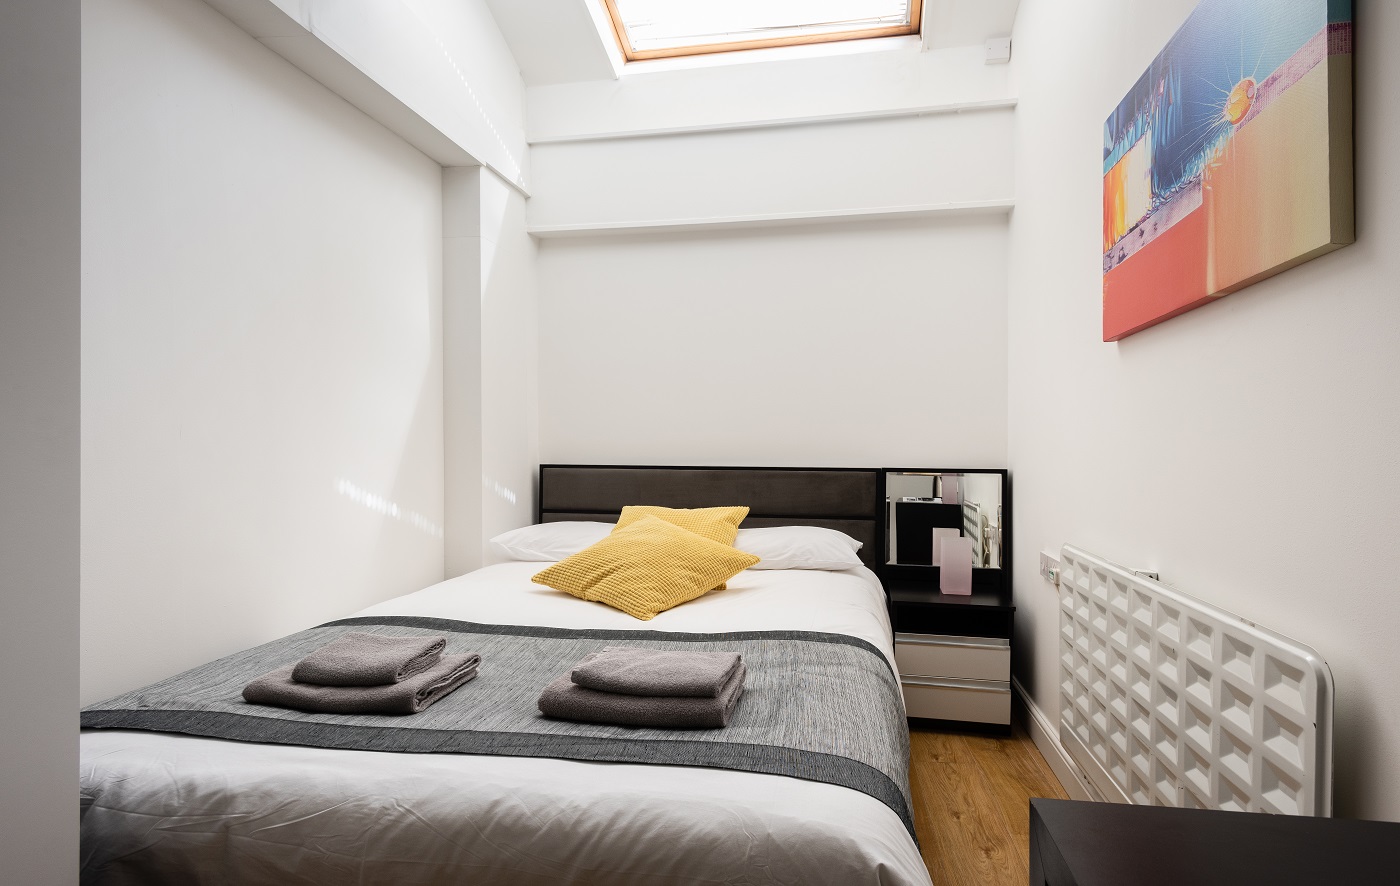 Central-Hoxton-Shoreditch-Aparthotel-East-London---Cool-Serviced-Apartments-London-All-Bills-Incl,-Wifi,-24h-Reception,-Aircon,-Lift-Access,-Breakfast---Urban-Stay-2